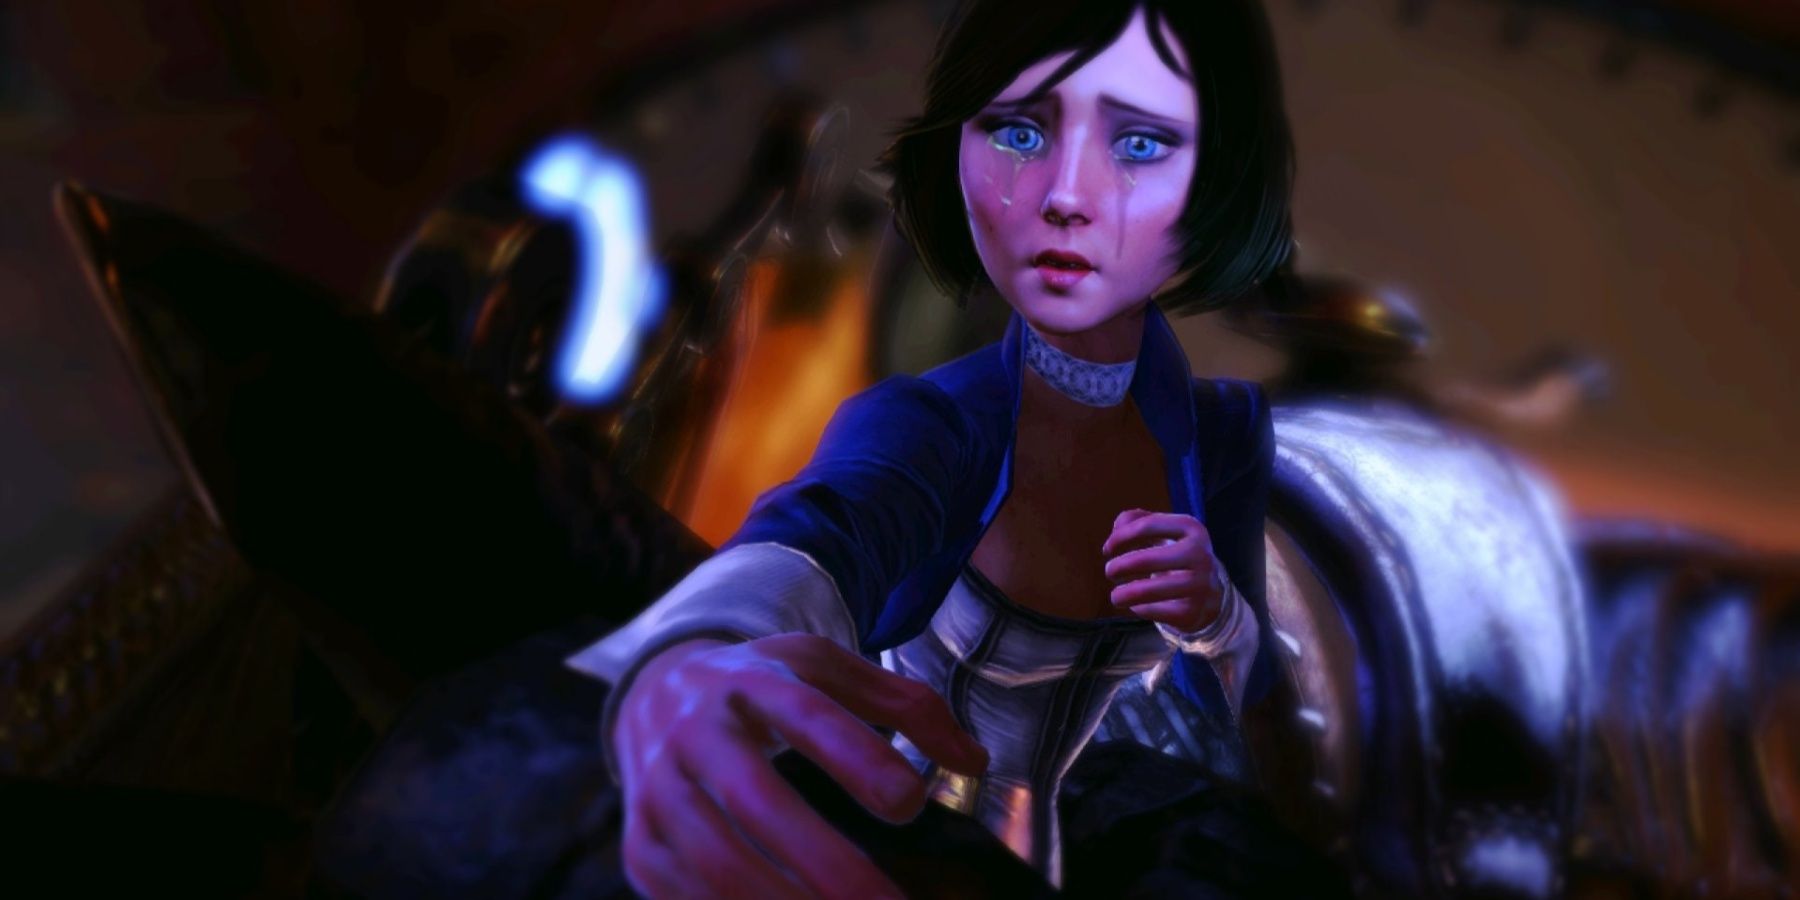 A crying woman, Elizabeth from Bioshock Infinite, leaning towards the camera